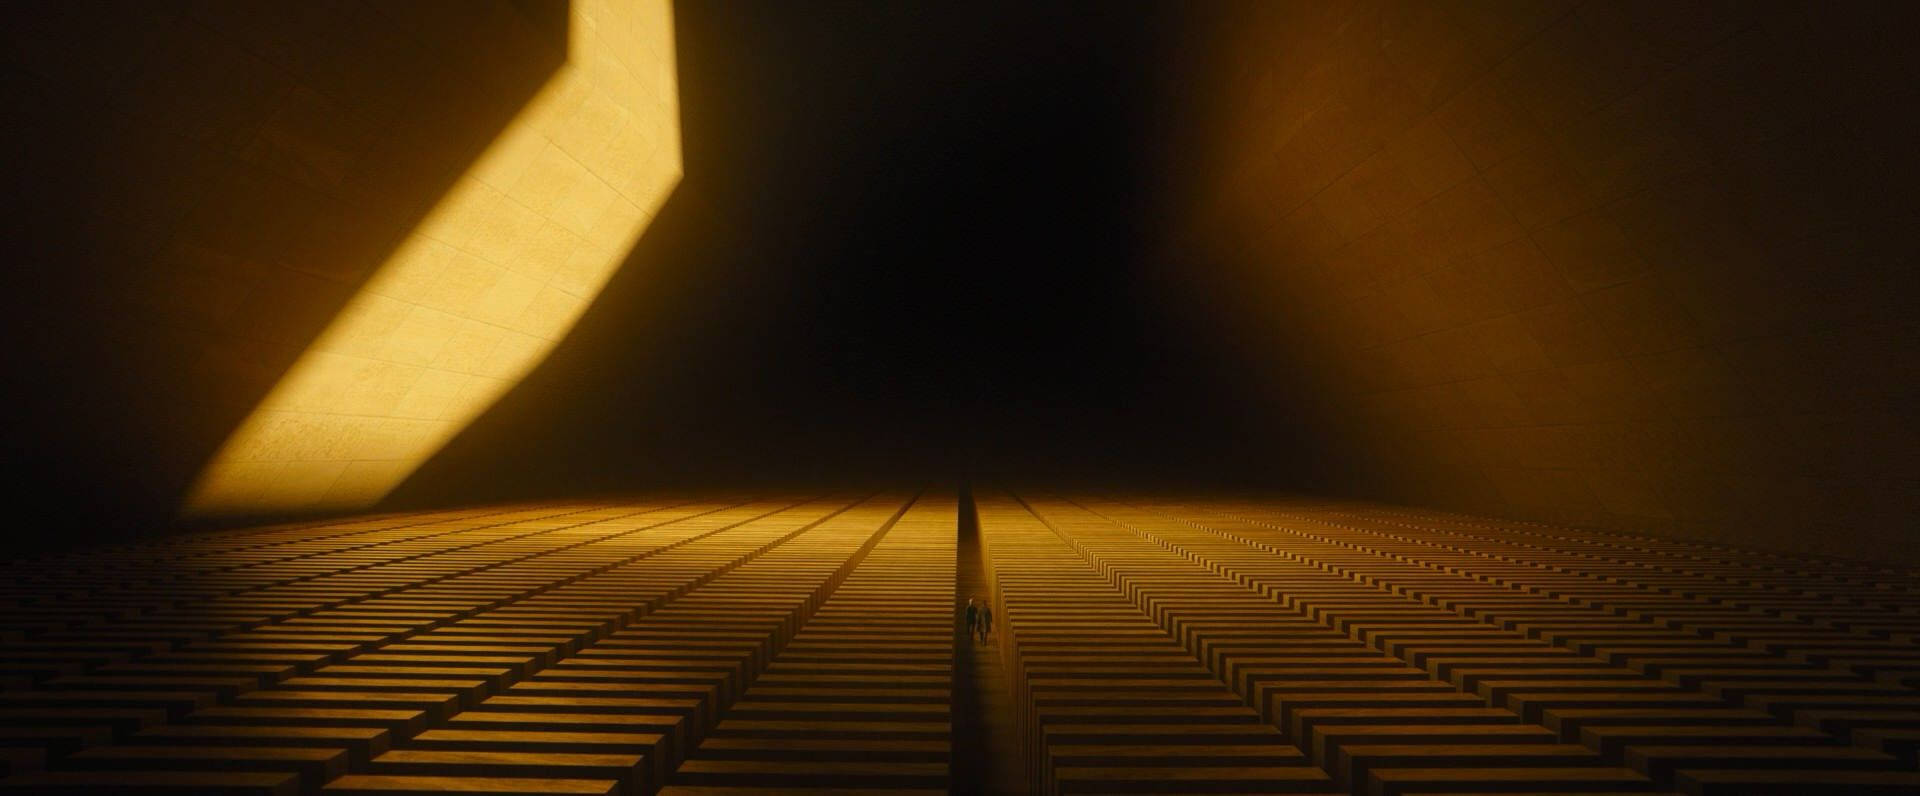 An aerial view of the rows of archives in Blade Runner 2049. Wallpaper